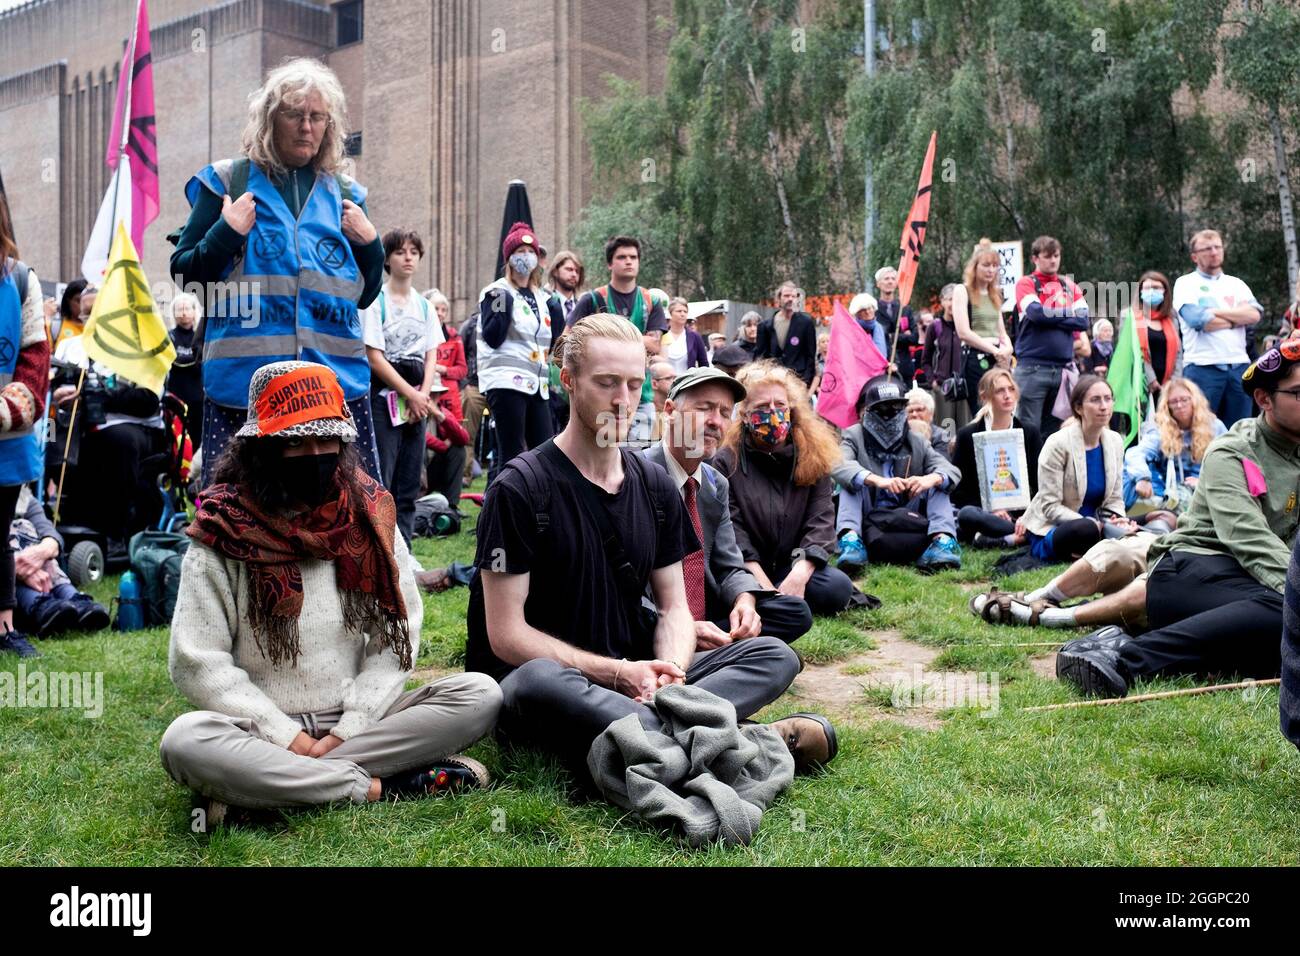 Protestors take a moment to breath during a speech as protestors gather outside of Tate Modern ahead of Extinction Rebellion's Mass Bail Break protest on the eleventh day of their Impossible Rebellion protests in London, United Kingdom on September 2, 2021. Stock Photo